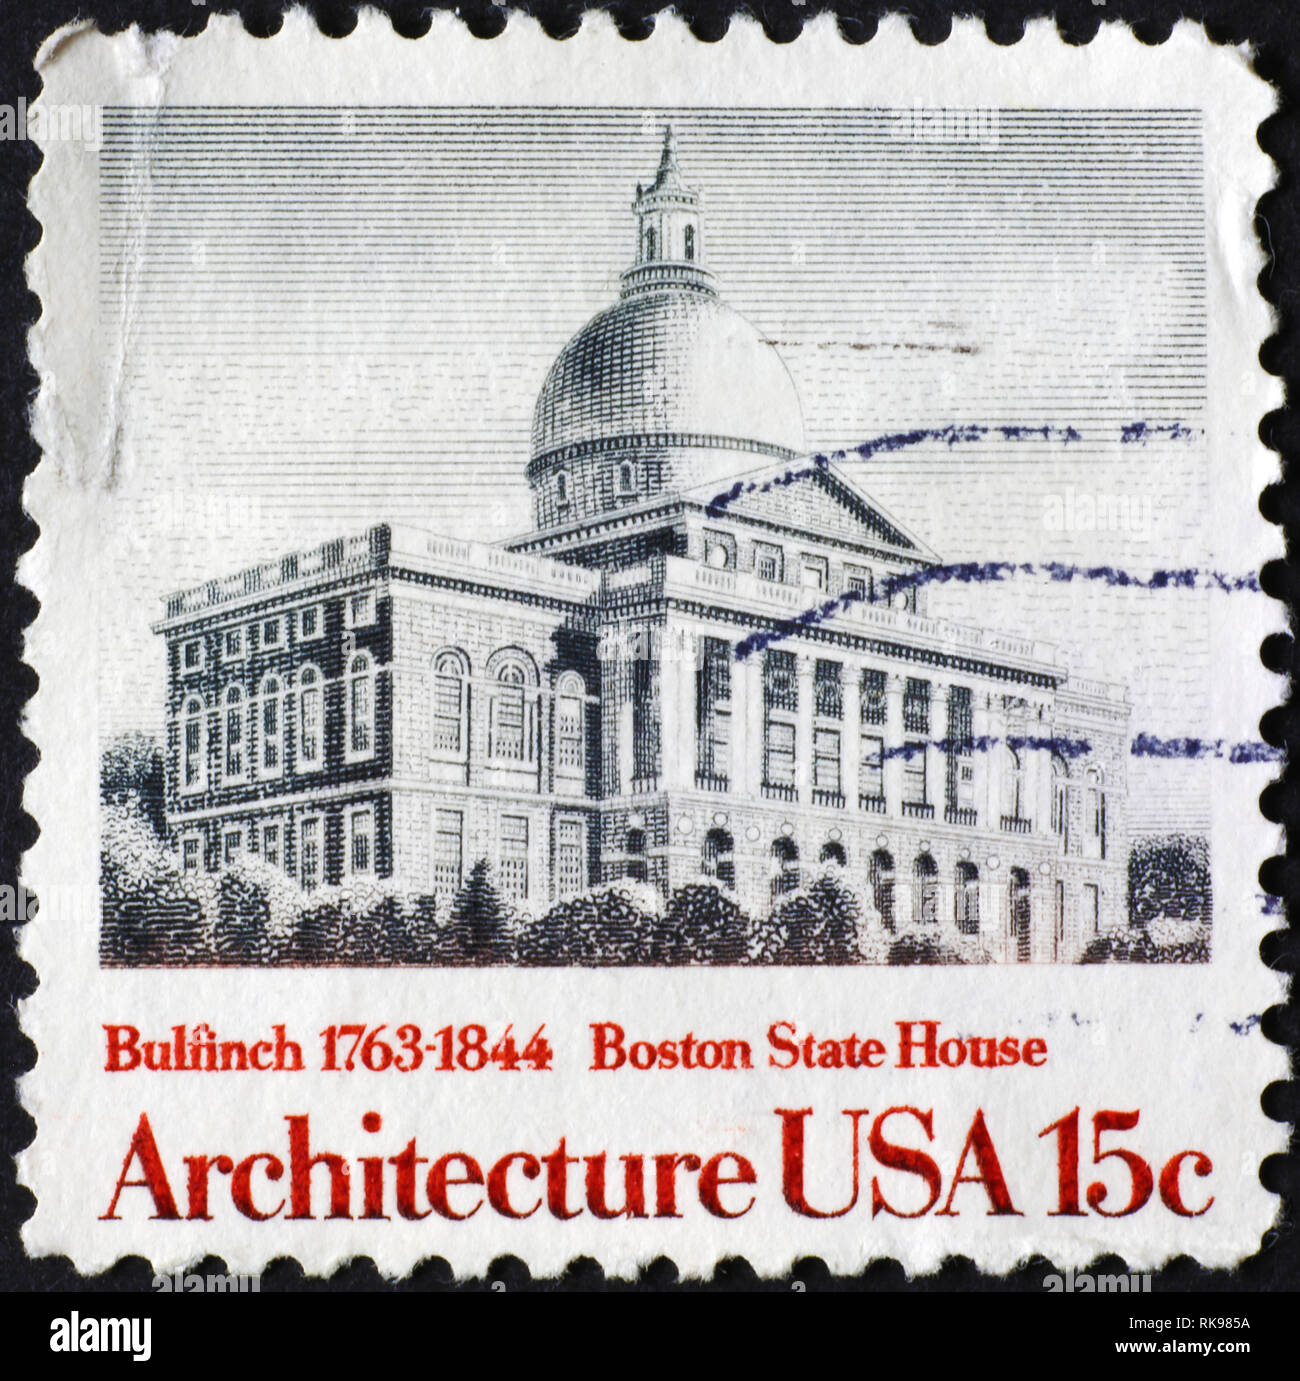 Boston State House on aerican postage stamp Stock Photo